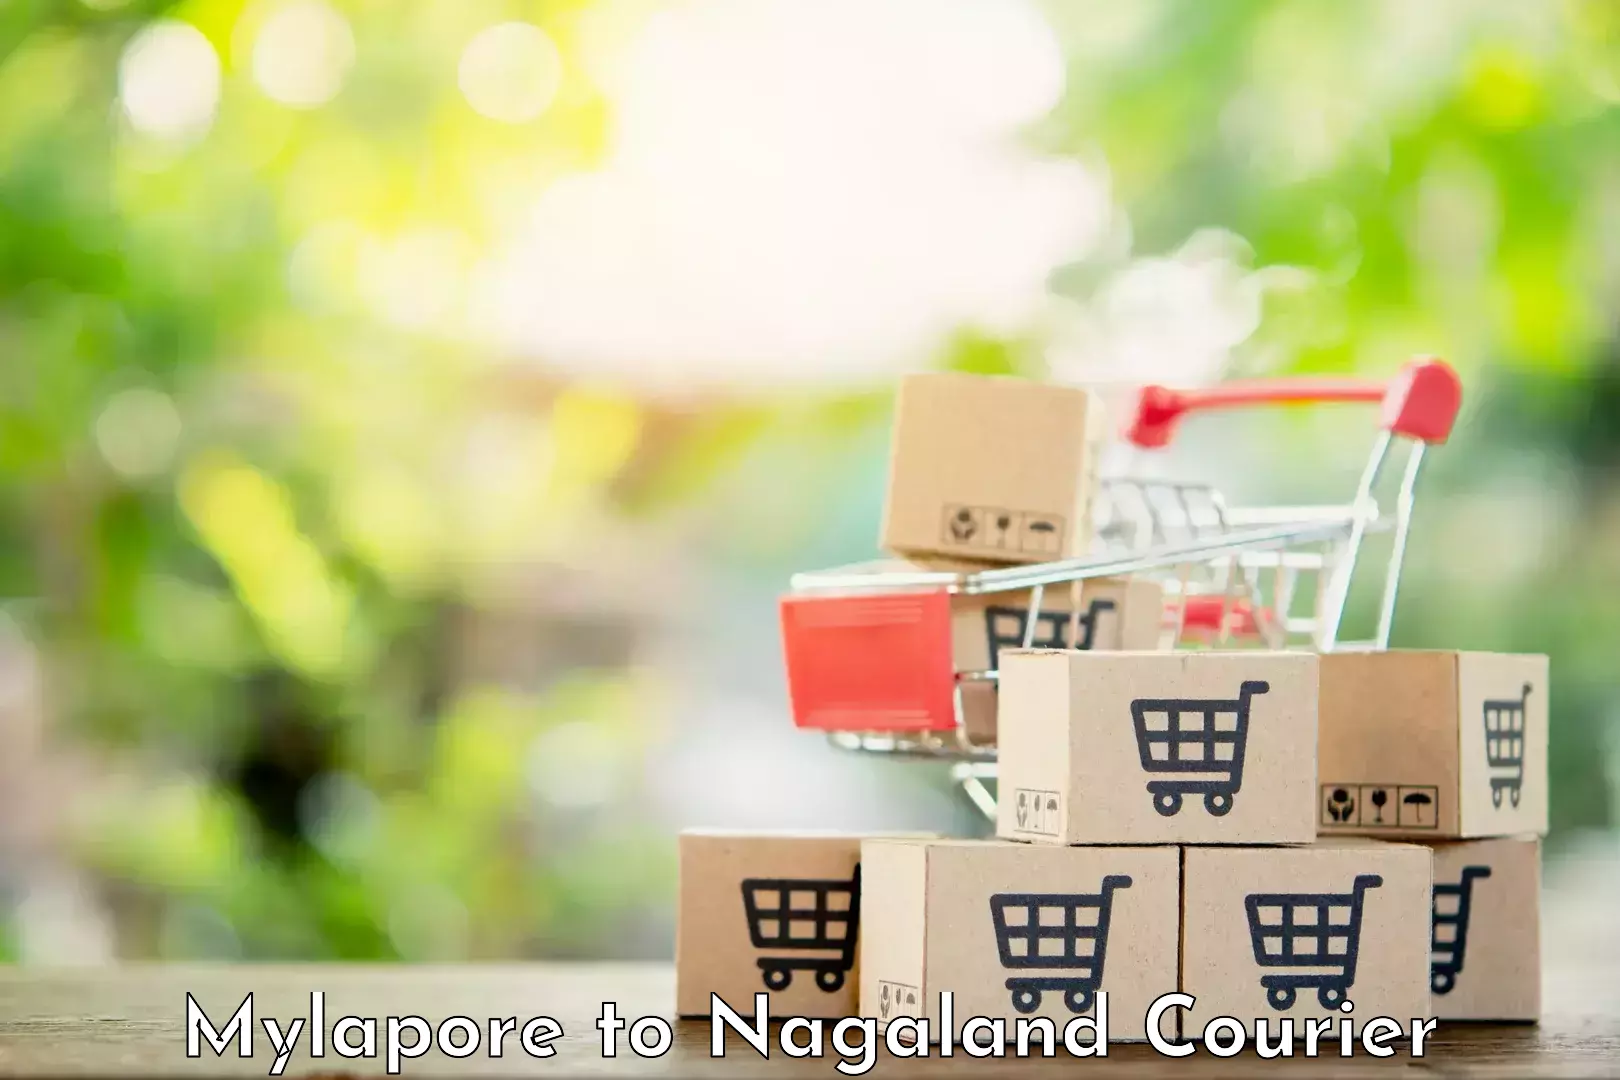 Multi-national courier services Mylapore to Nagaland